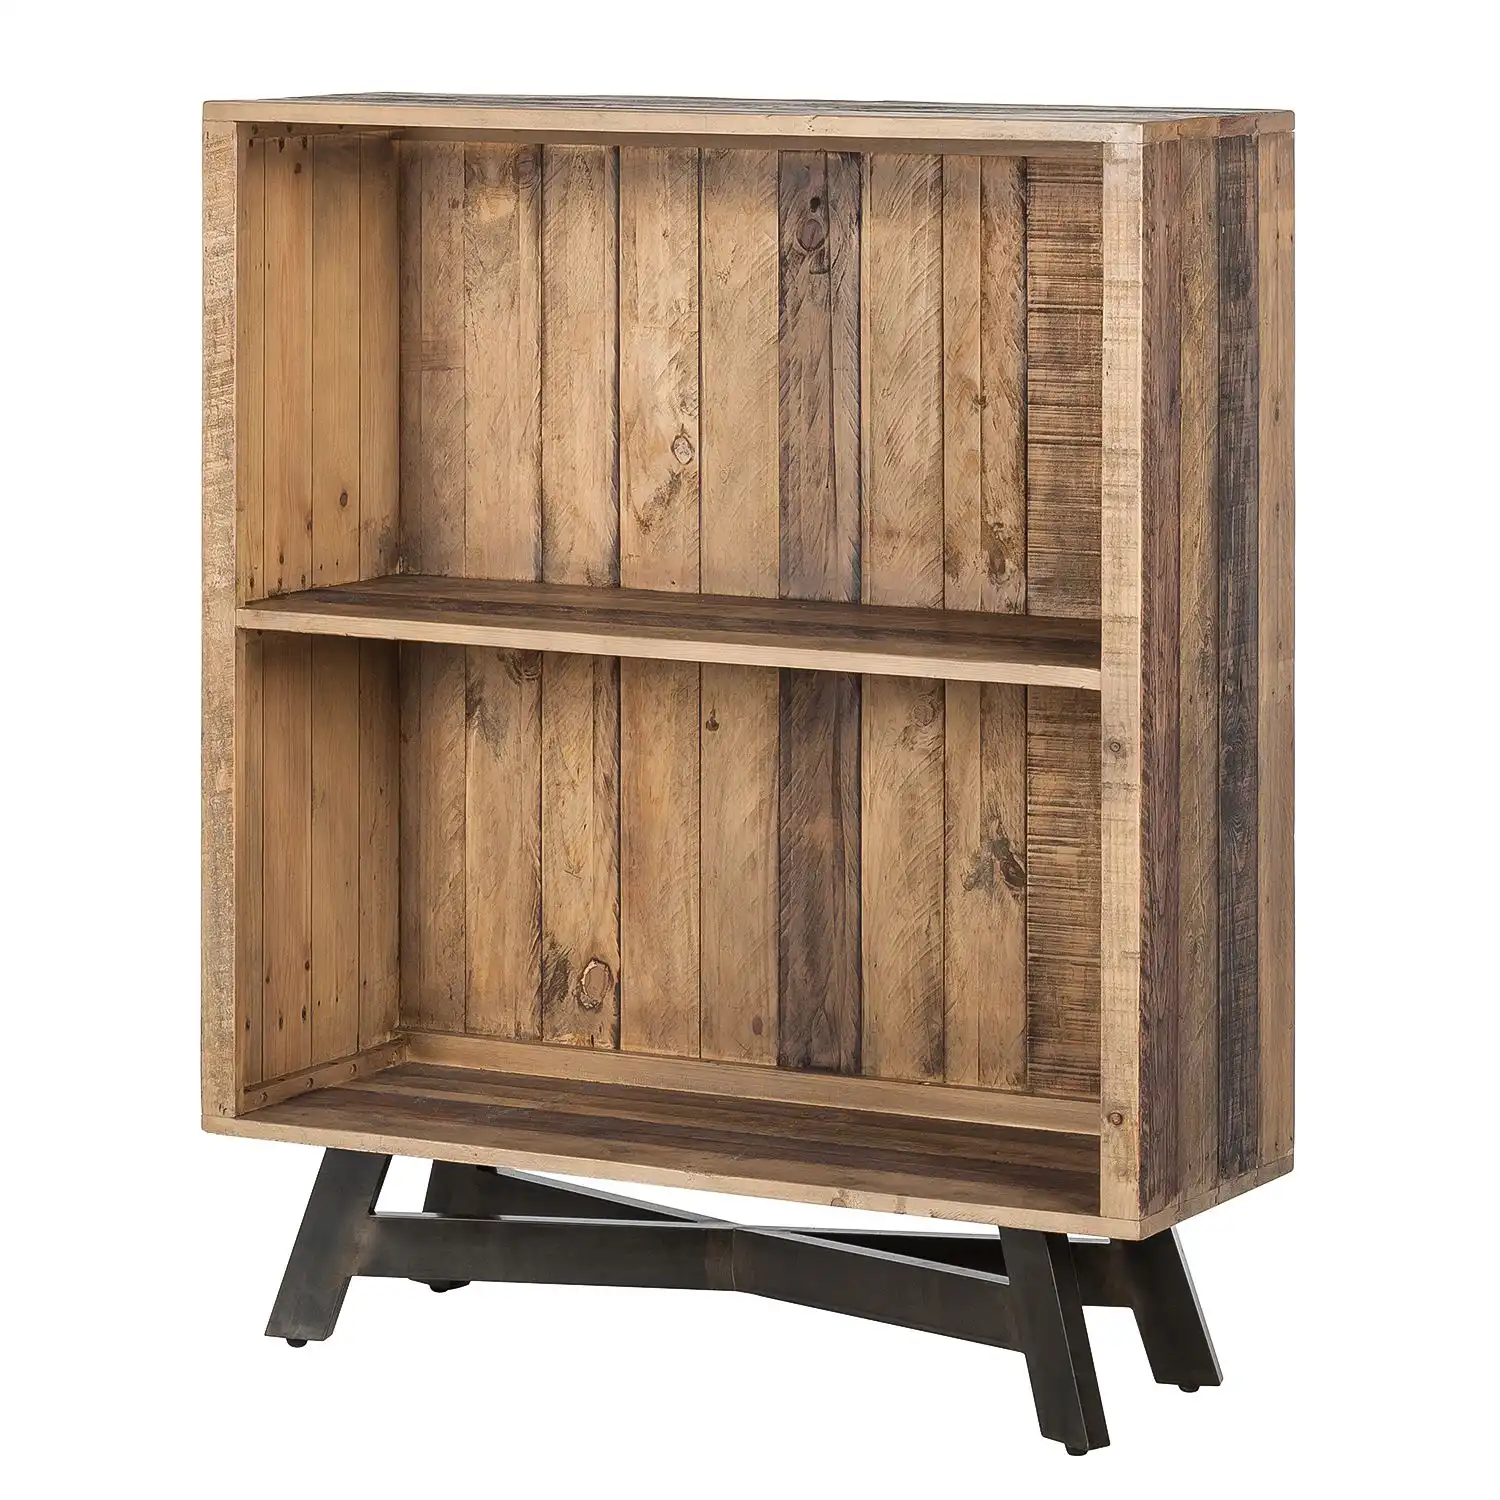 Reclaimed Wood Cabinet with 2 open compartment - popular handicrafts